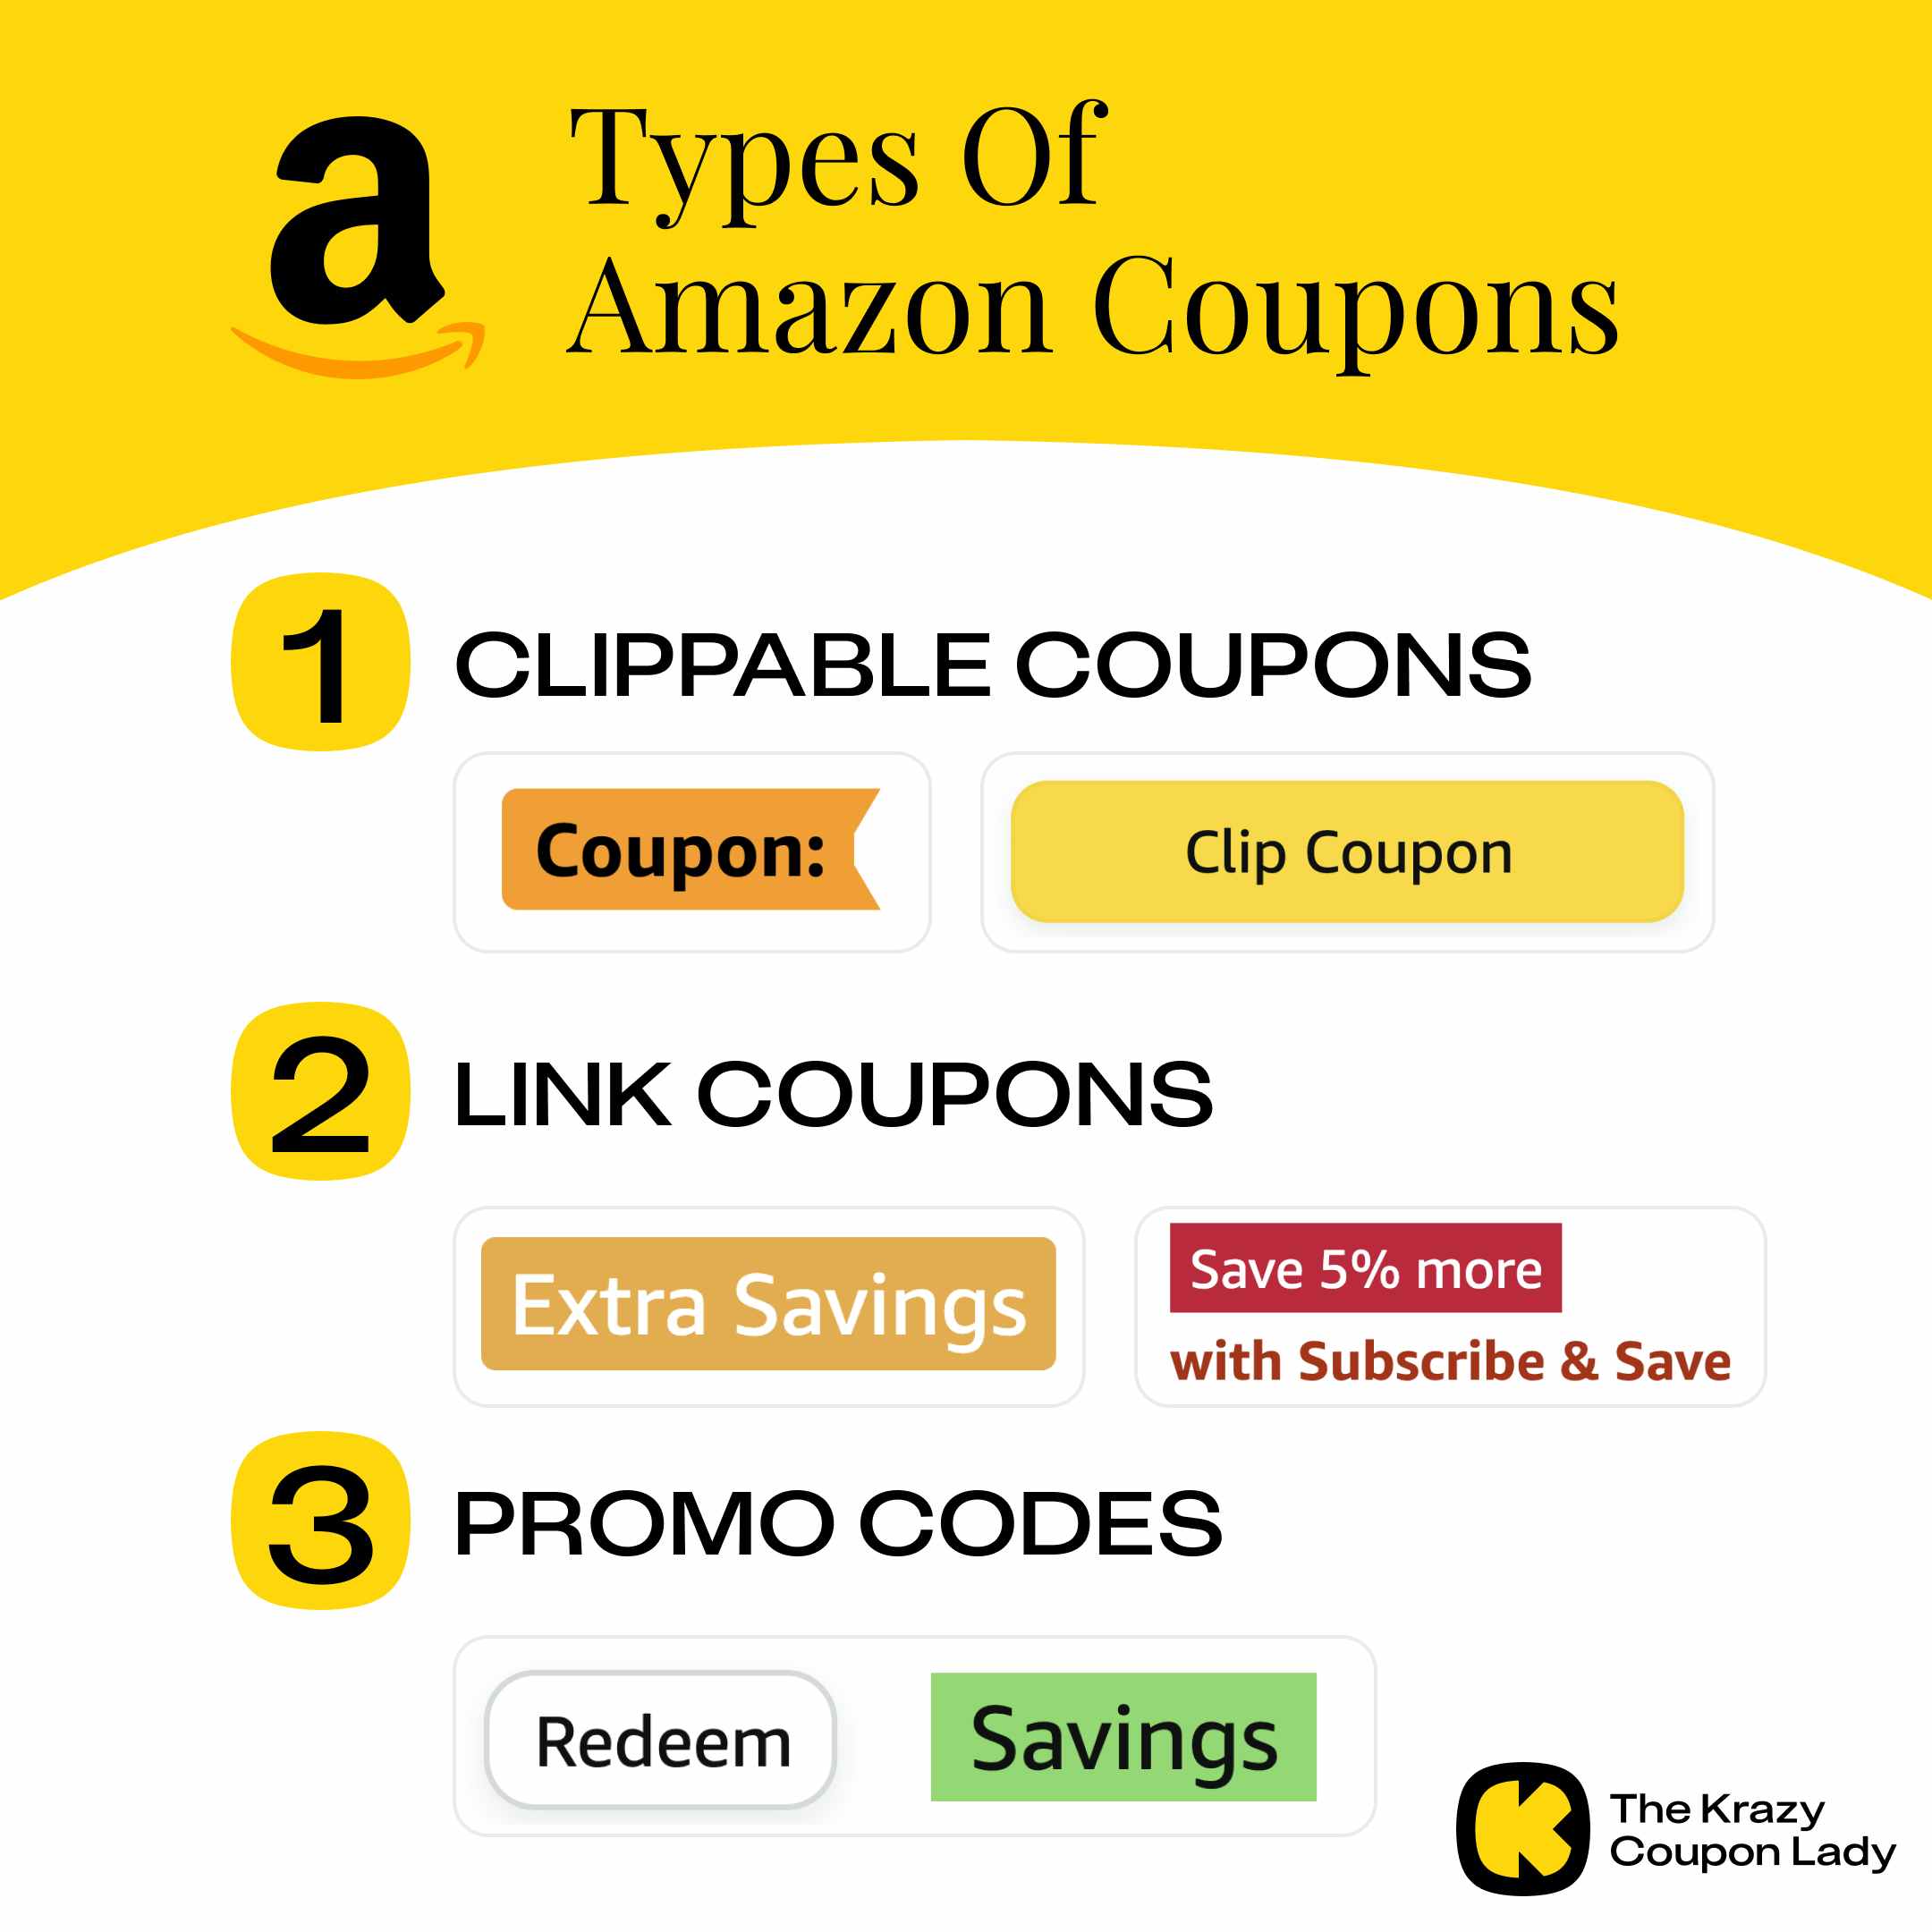 Types-of-Amazon-Coupons